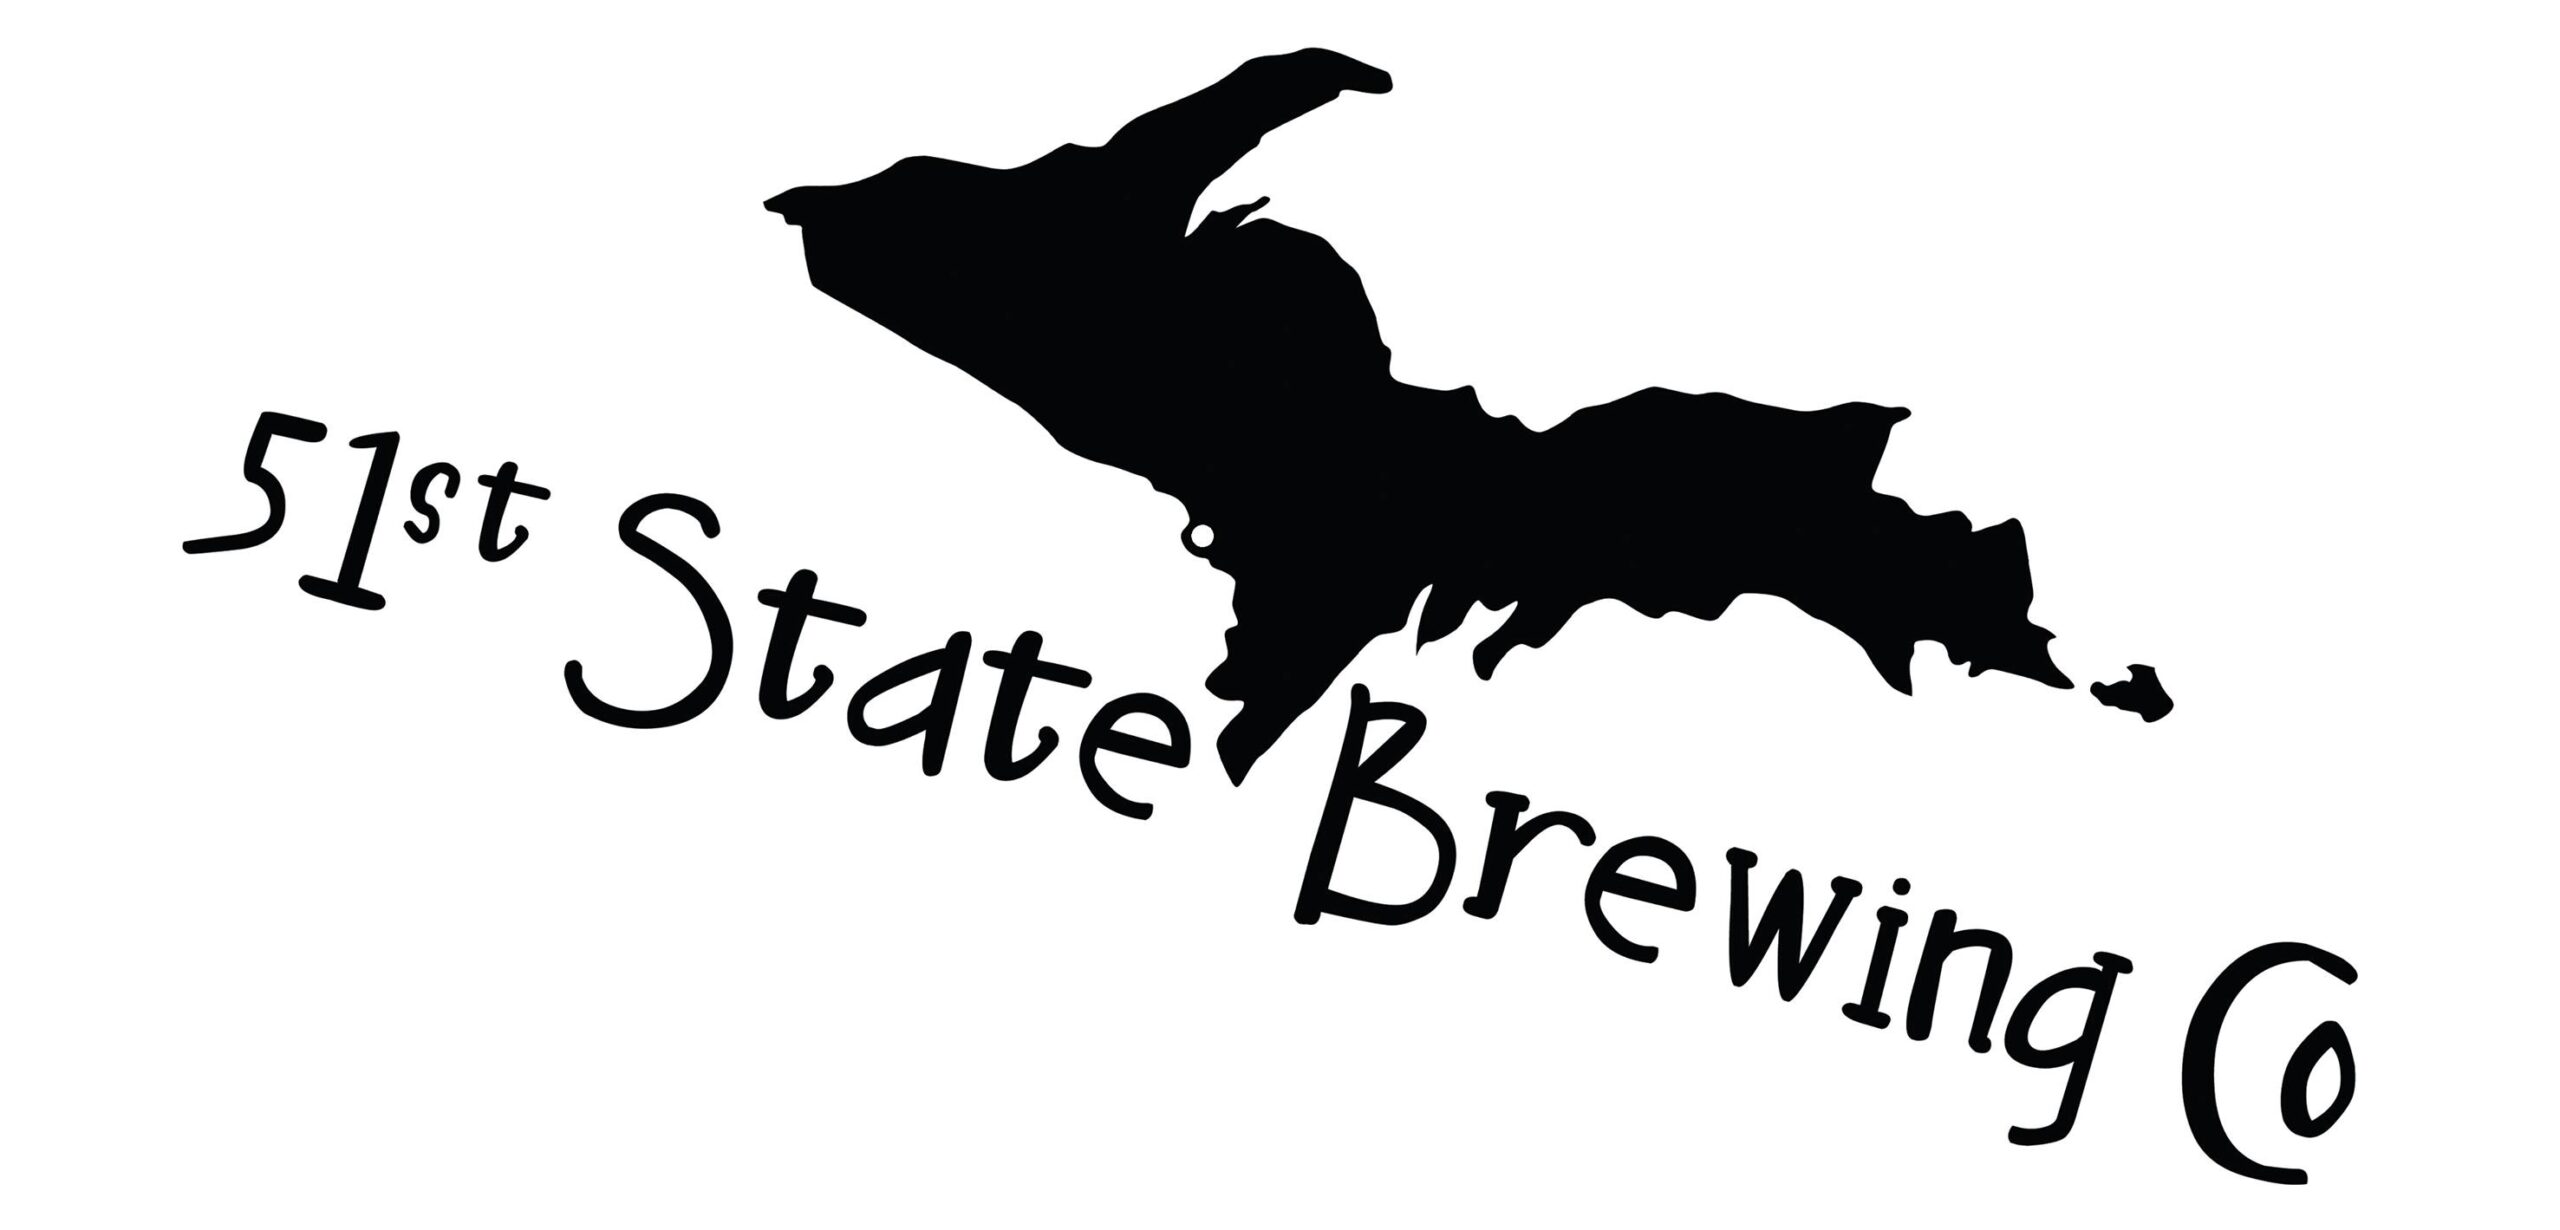 51st State Brewing Co Logo